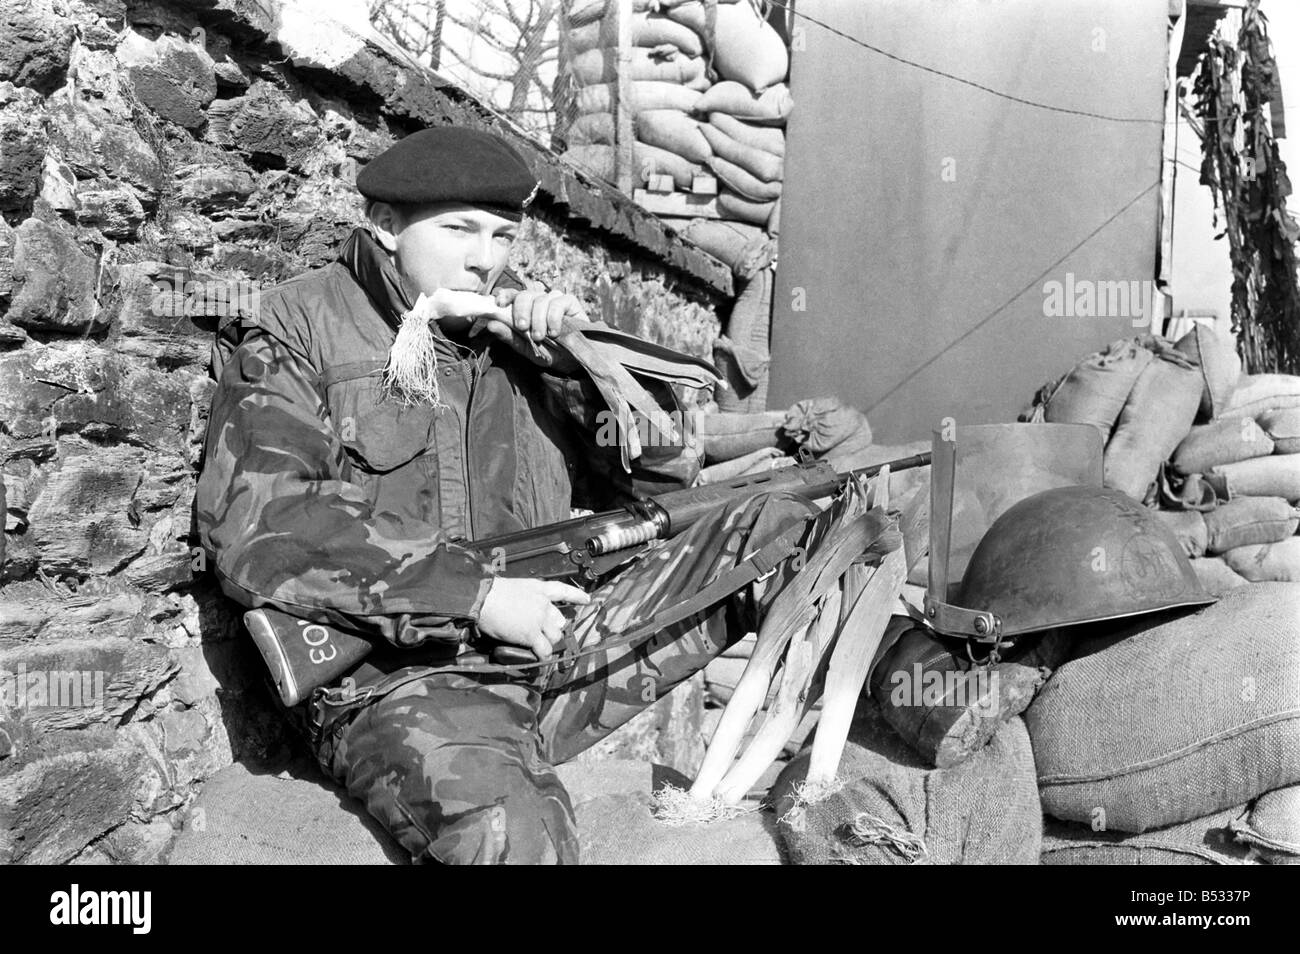 Northern Ireland 1972. Gunner Michael Davies of the army light defence regiment in Londonderry enjoys a leek to celebrate St Davids Day. 72-3401-001 Stock Photo